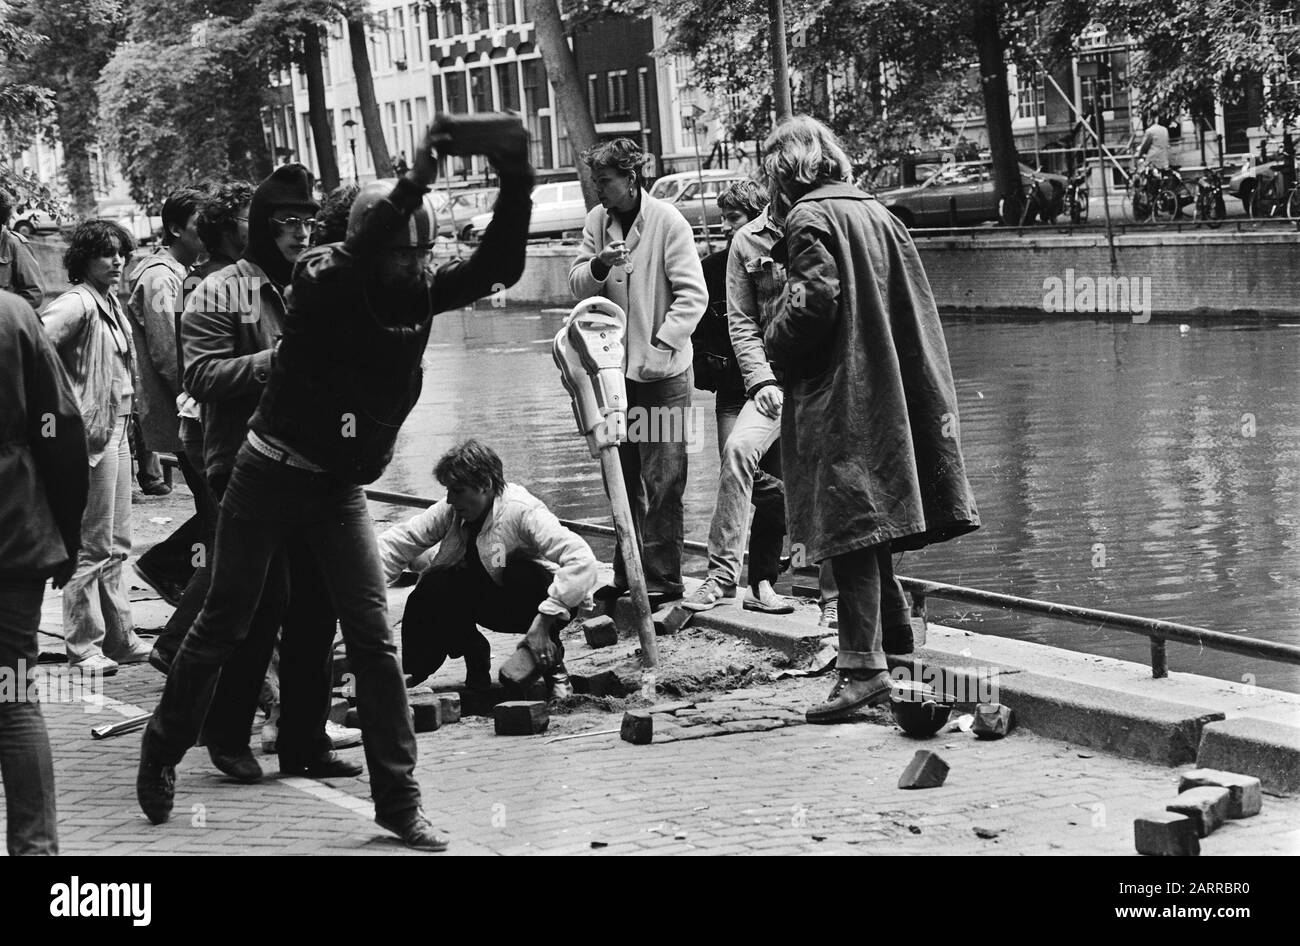 Rumoer rond squat Herengracht, Amsterdam; stone yolks in action Date: July 3, 1980 Location: Amsterdam, Noord-Holland Keywords: squats, squatters Stock Photo